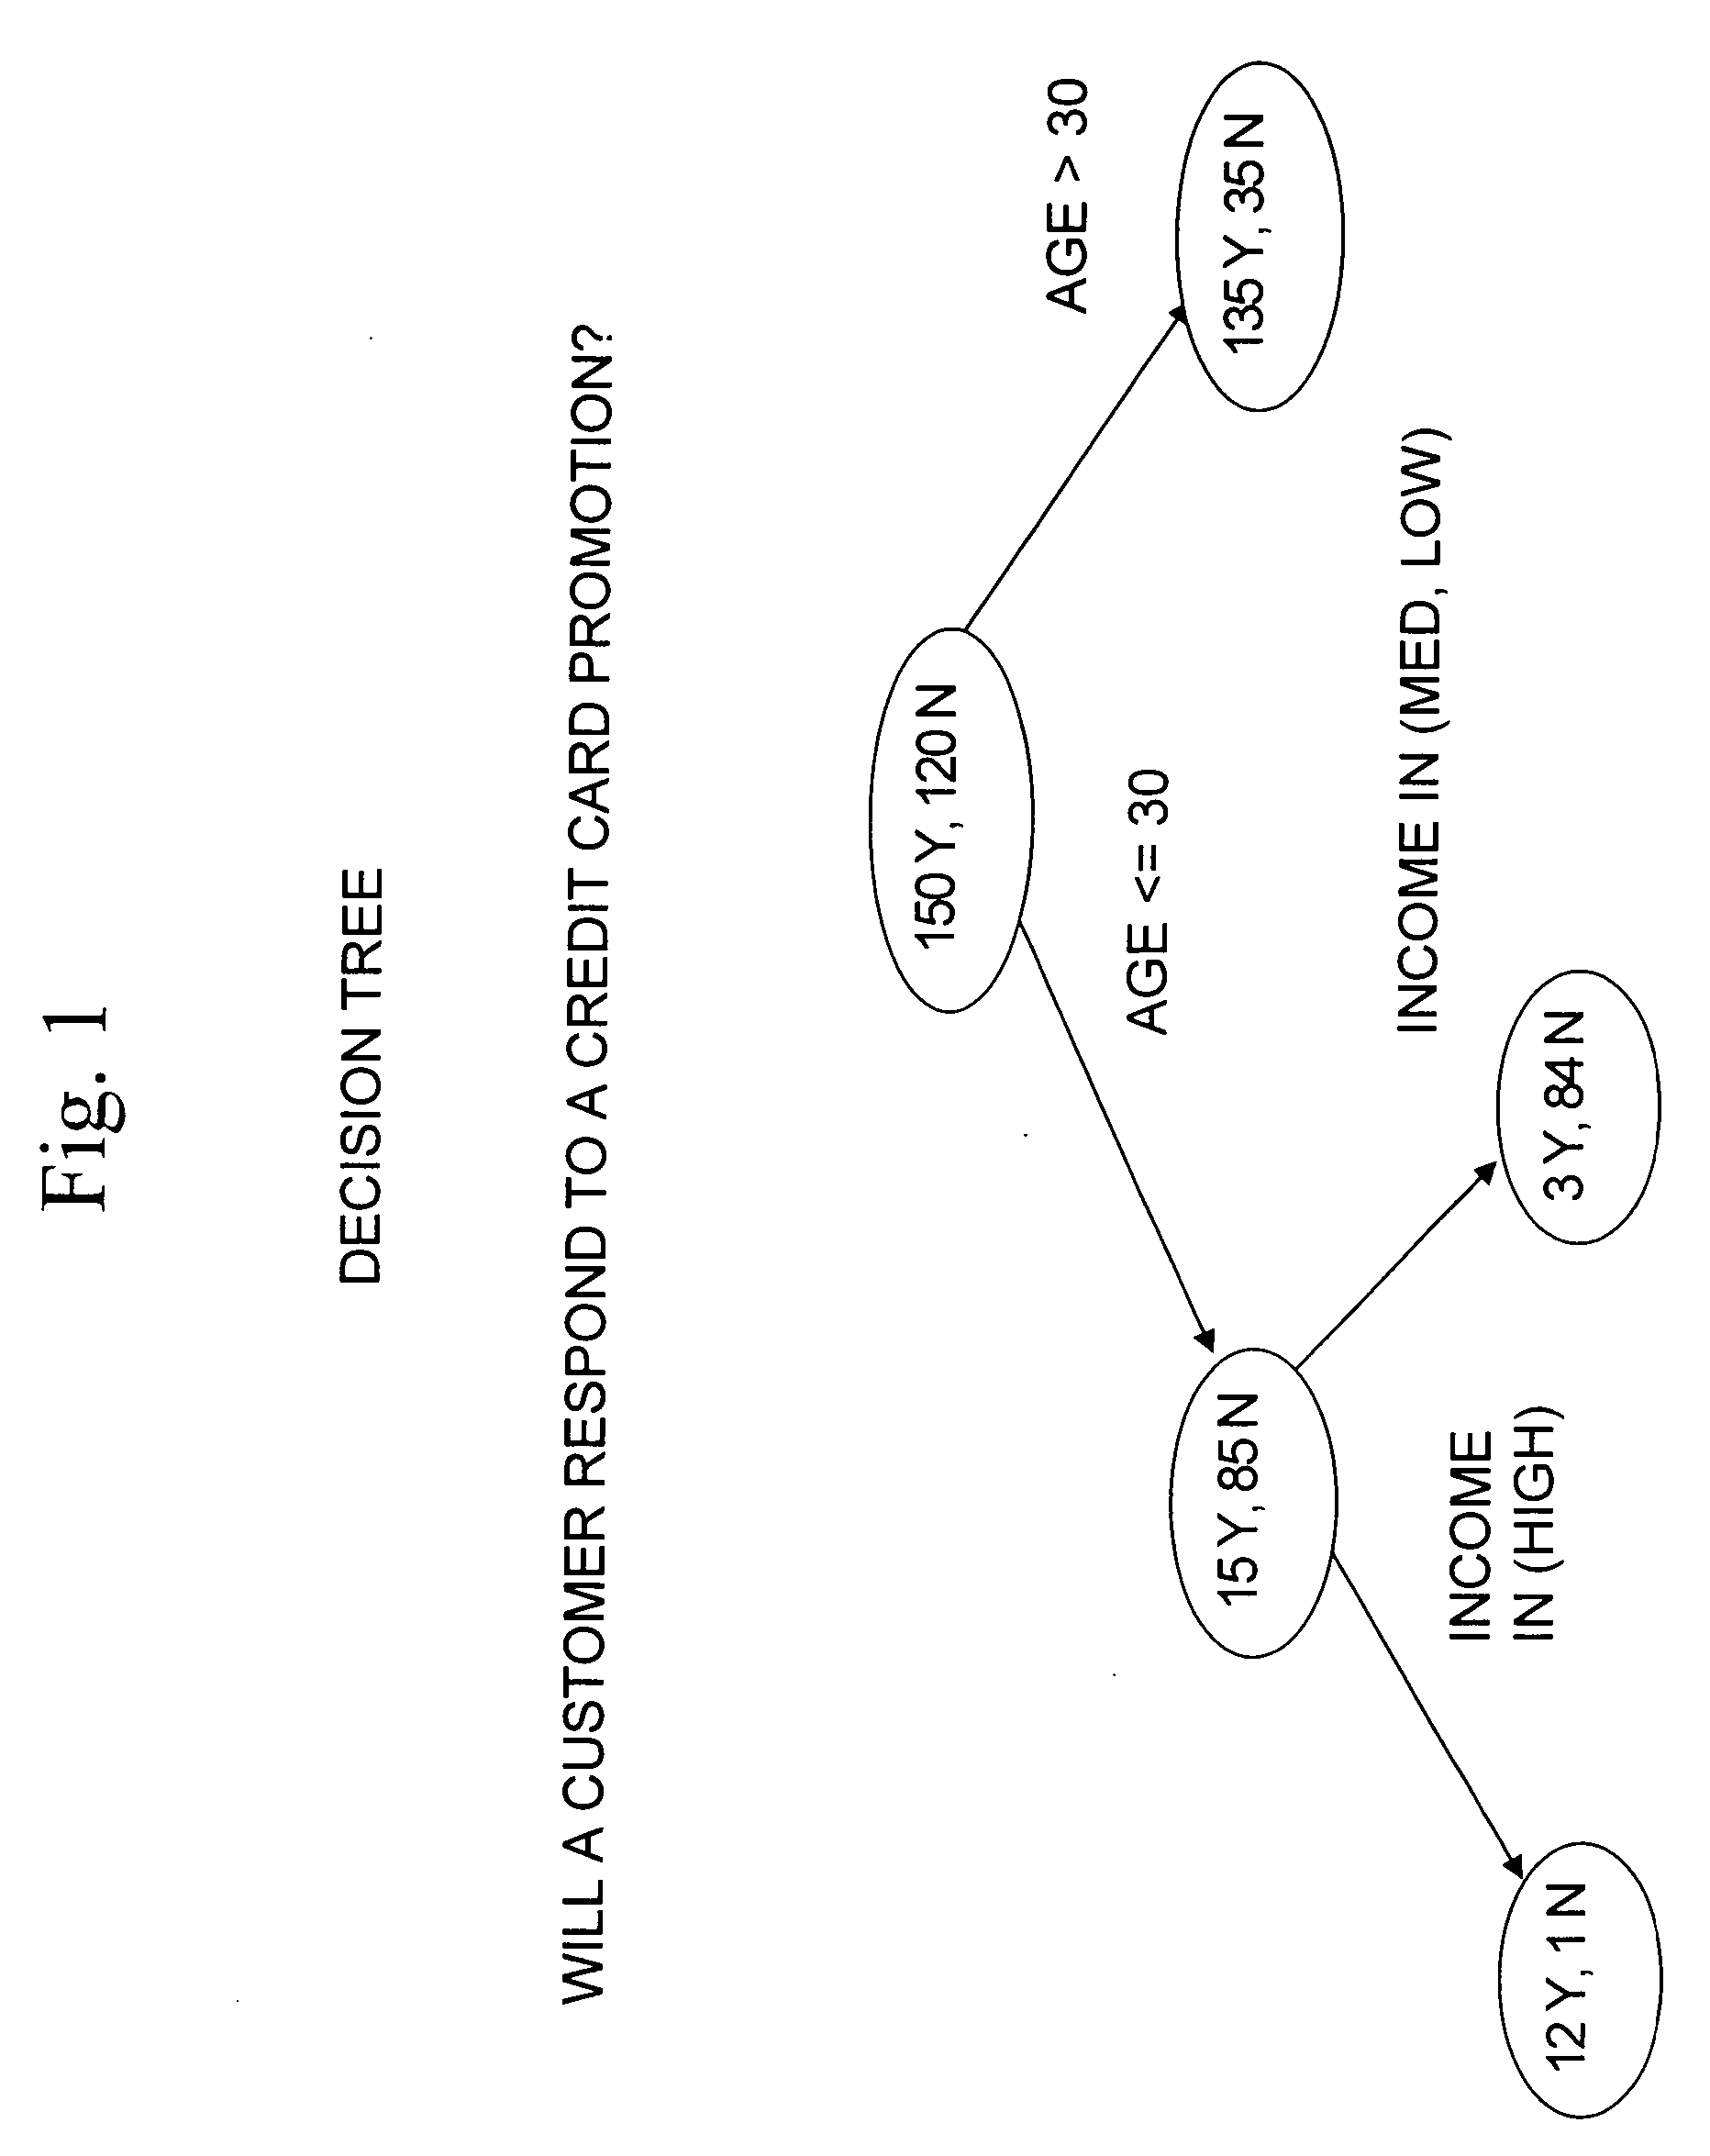 System and method for building decision trees in a database